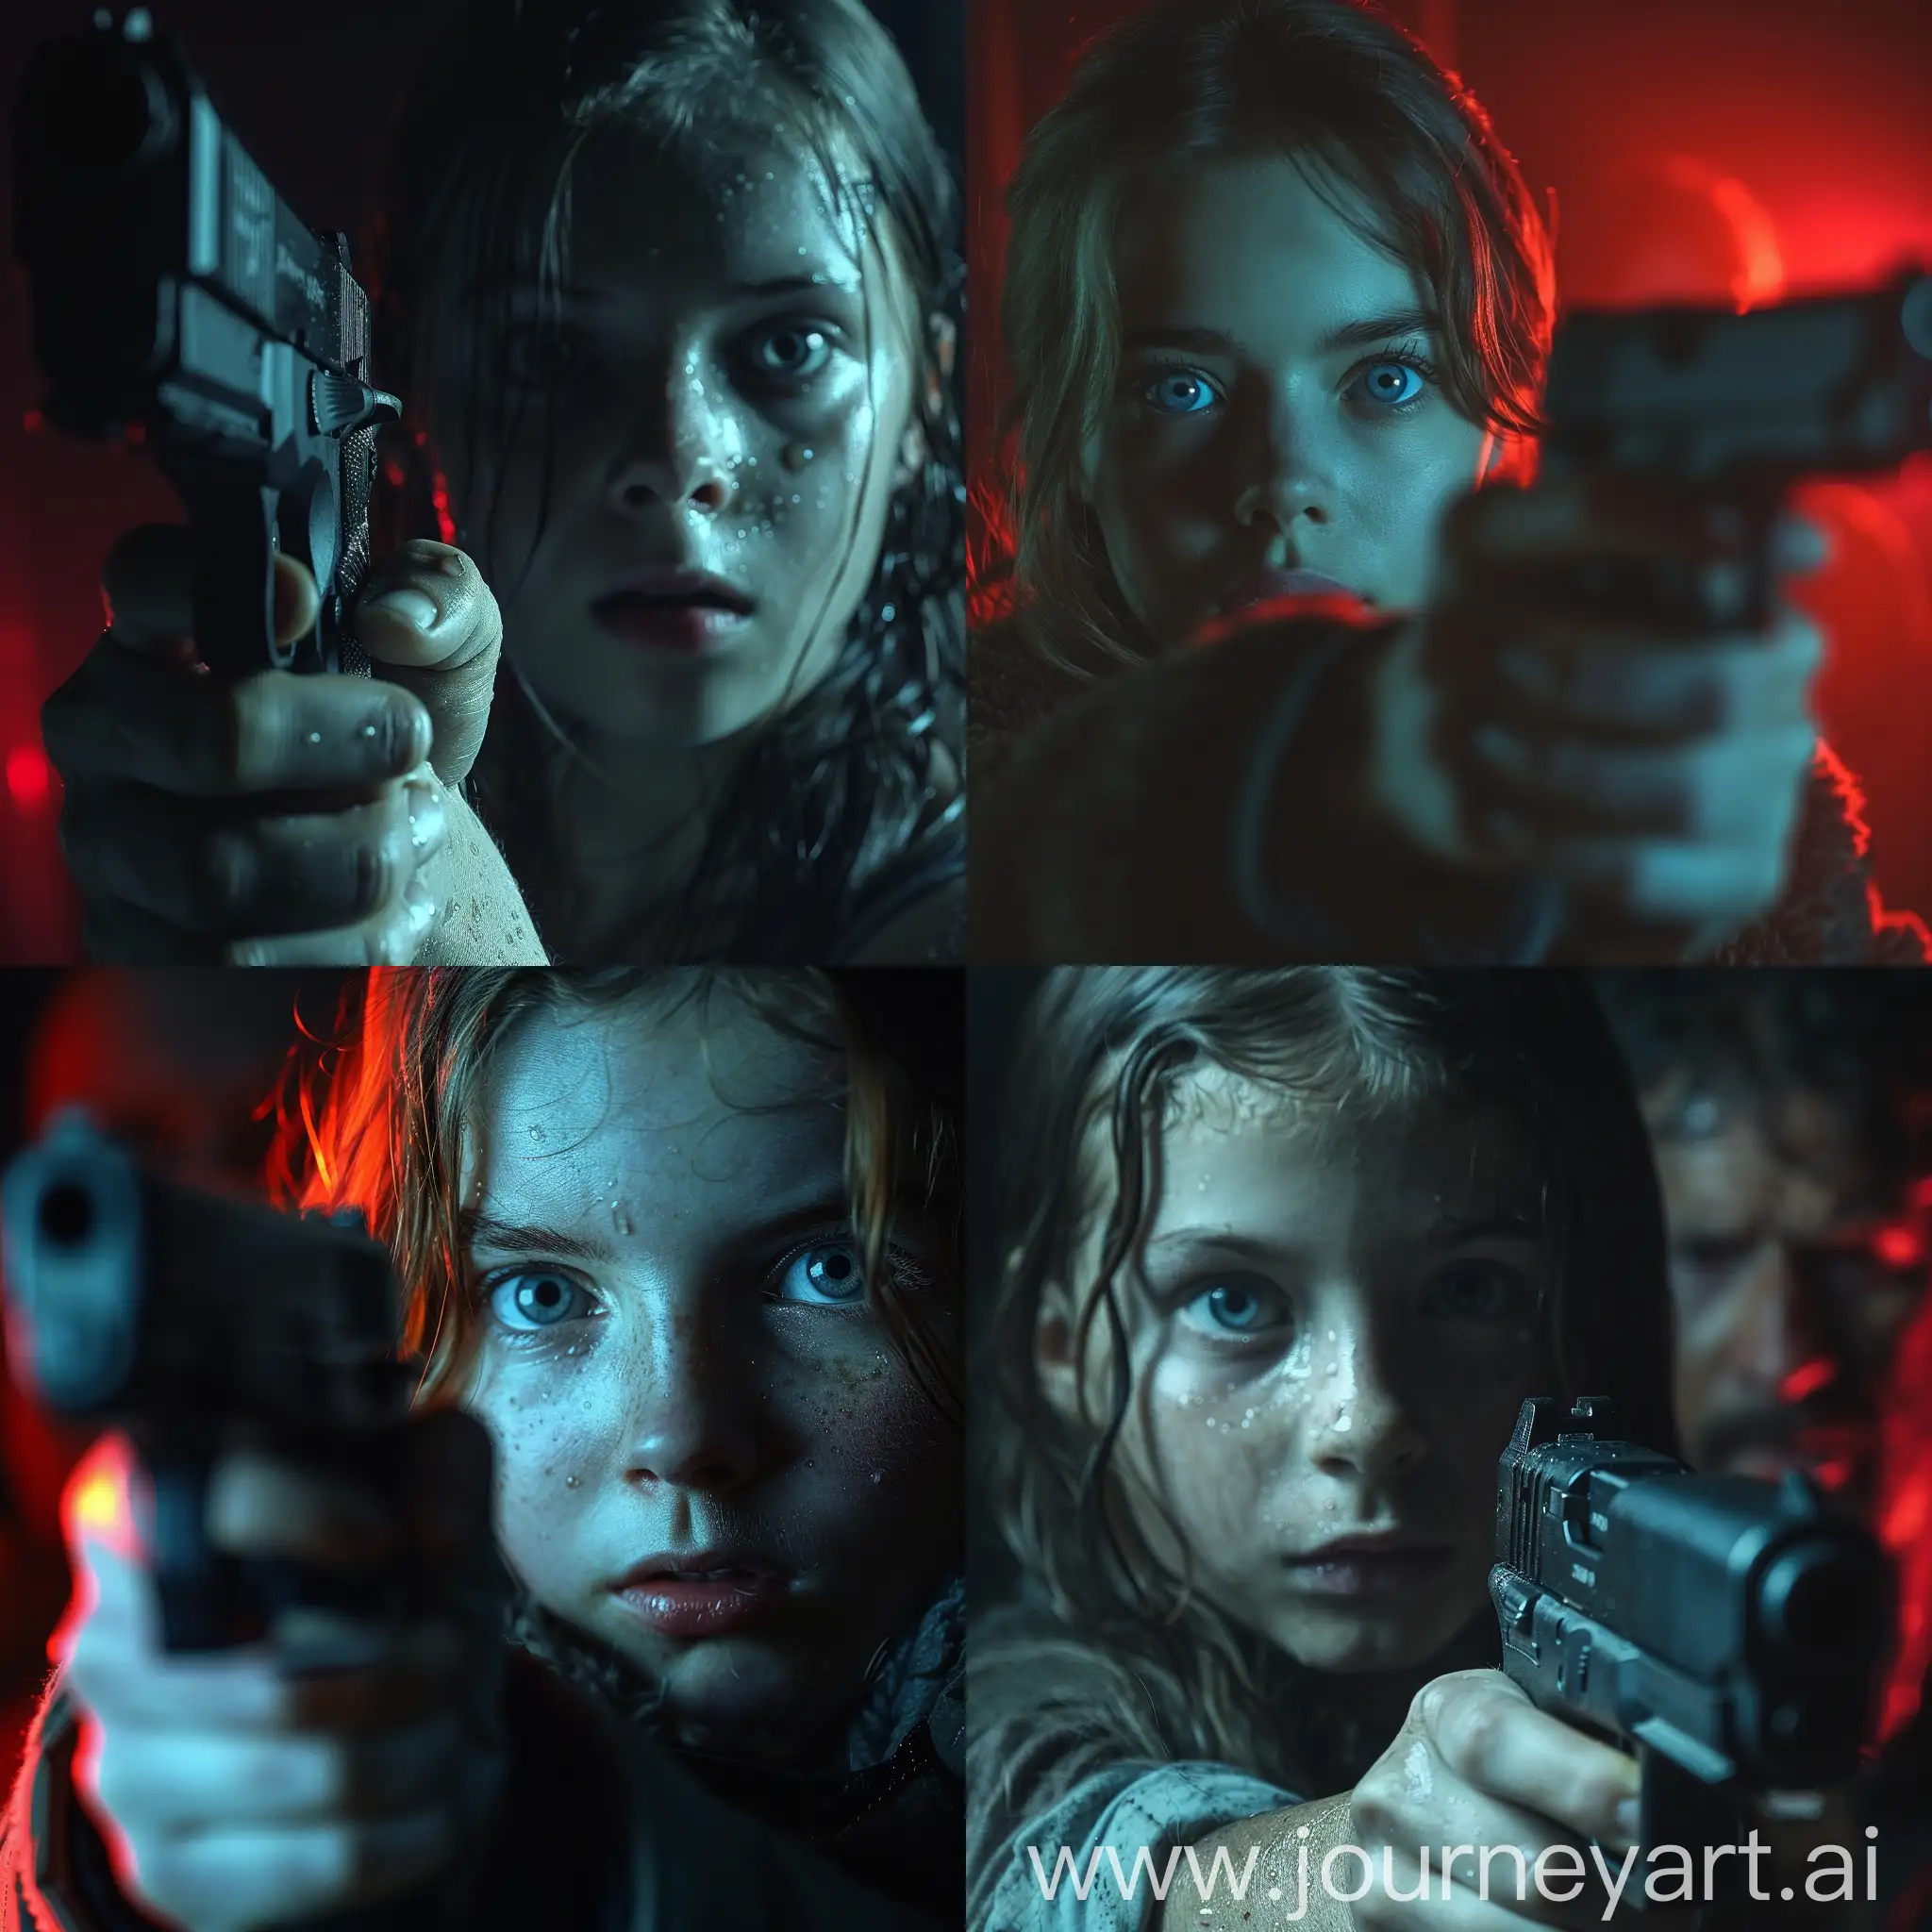 a disturbing and intense scene. Here are the details:

blue eyes girl Fappears to be in a vulnerable position.
Person Holding a Gun:
Another person,, is holding a black handgun.
The gun is positioned close to the head of the blurred person.
The hand holding the gun is steady and deliberate.
Background:
The overall background is dark, with some areas illuminated in red light.
The scene suggests tension, danger, and potential harm.
Please note that this is an artificially generated description based on the visual elements in the image. The context and intent behind this scene remain unknown  --style raw --stylize 750